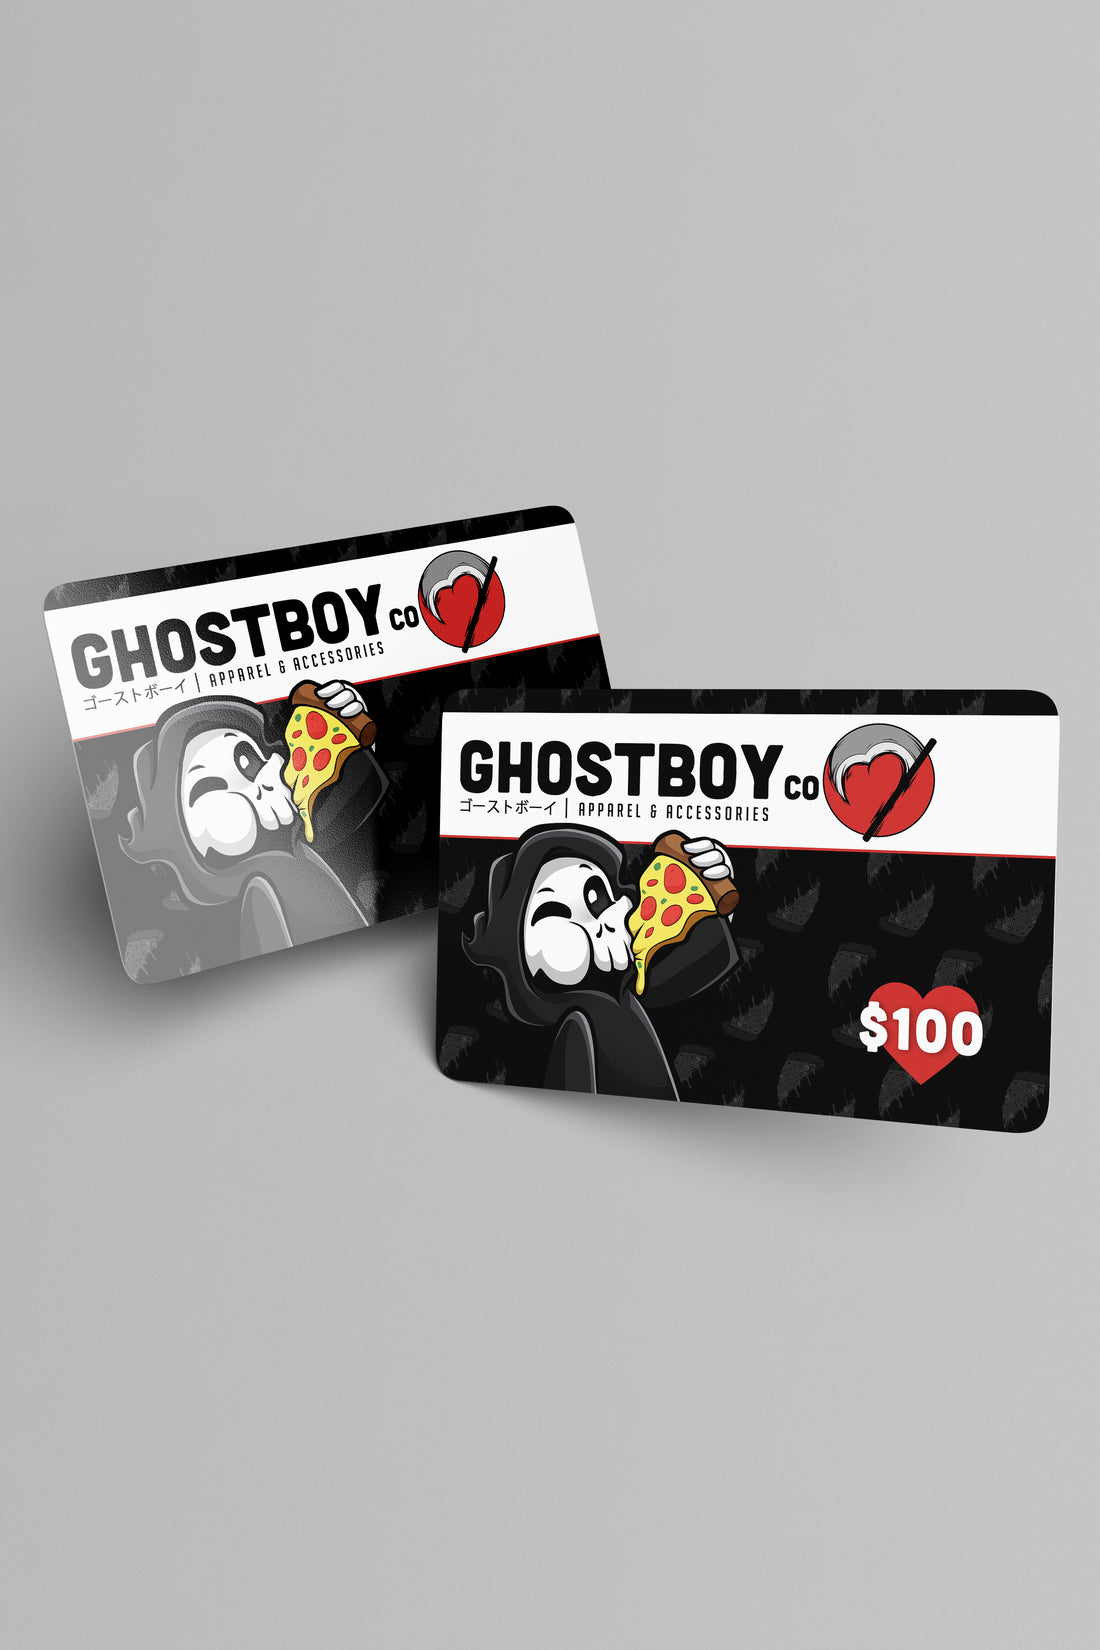 Ghostboy Co. Gift Card